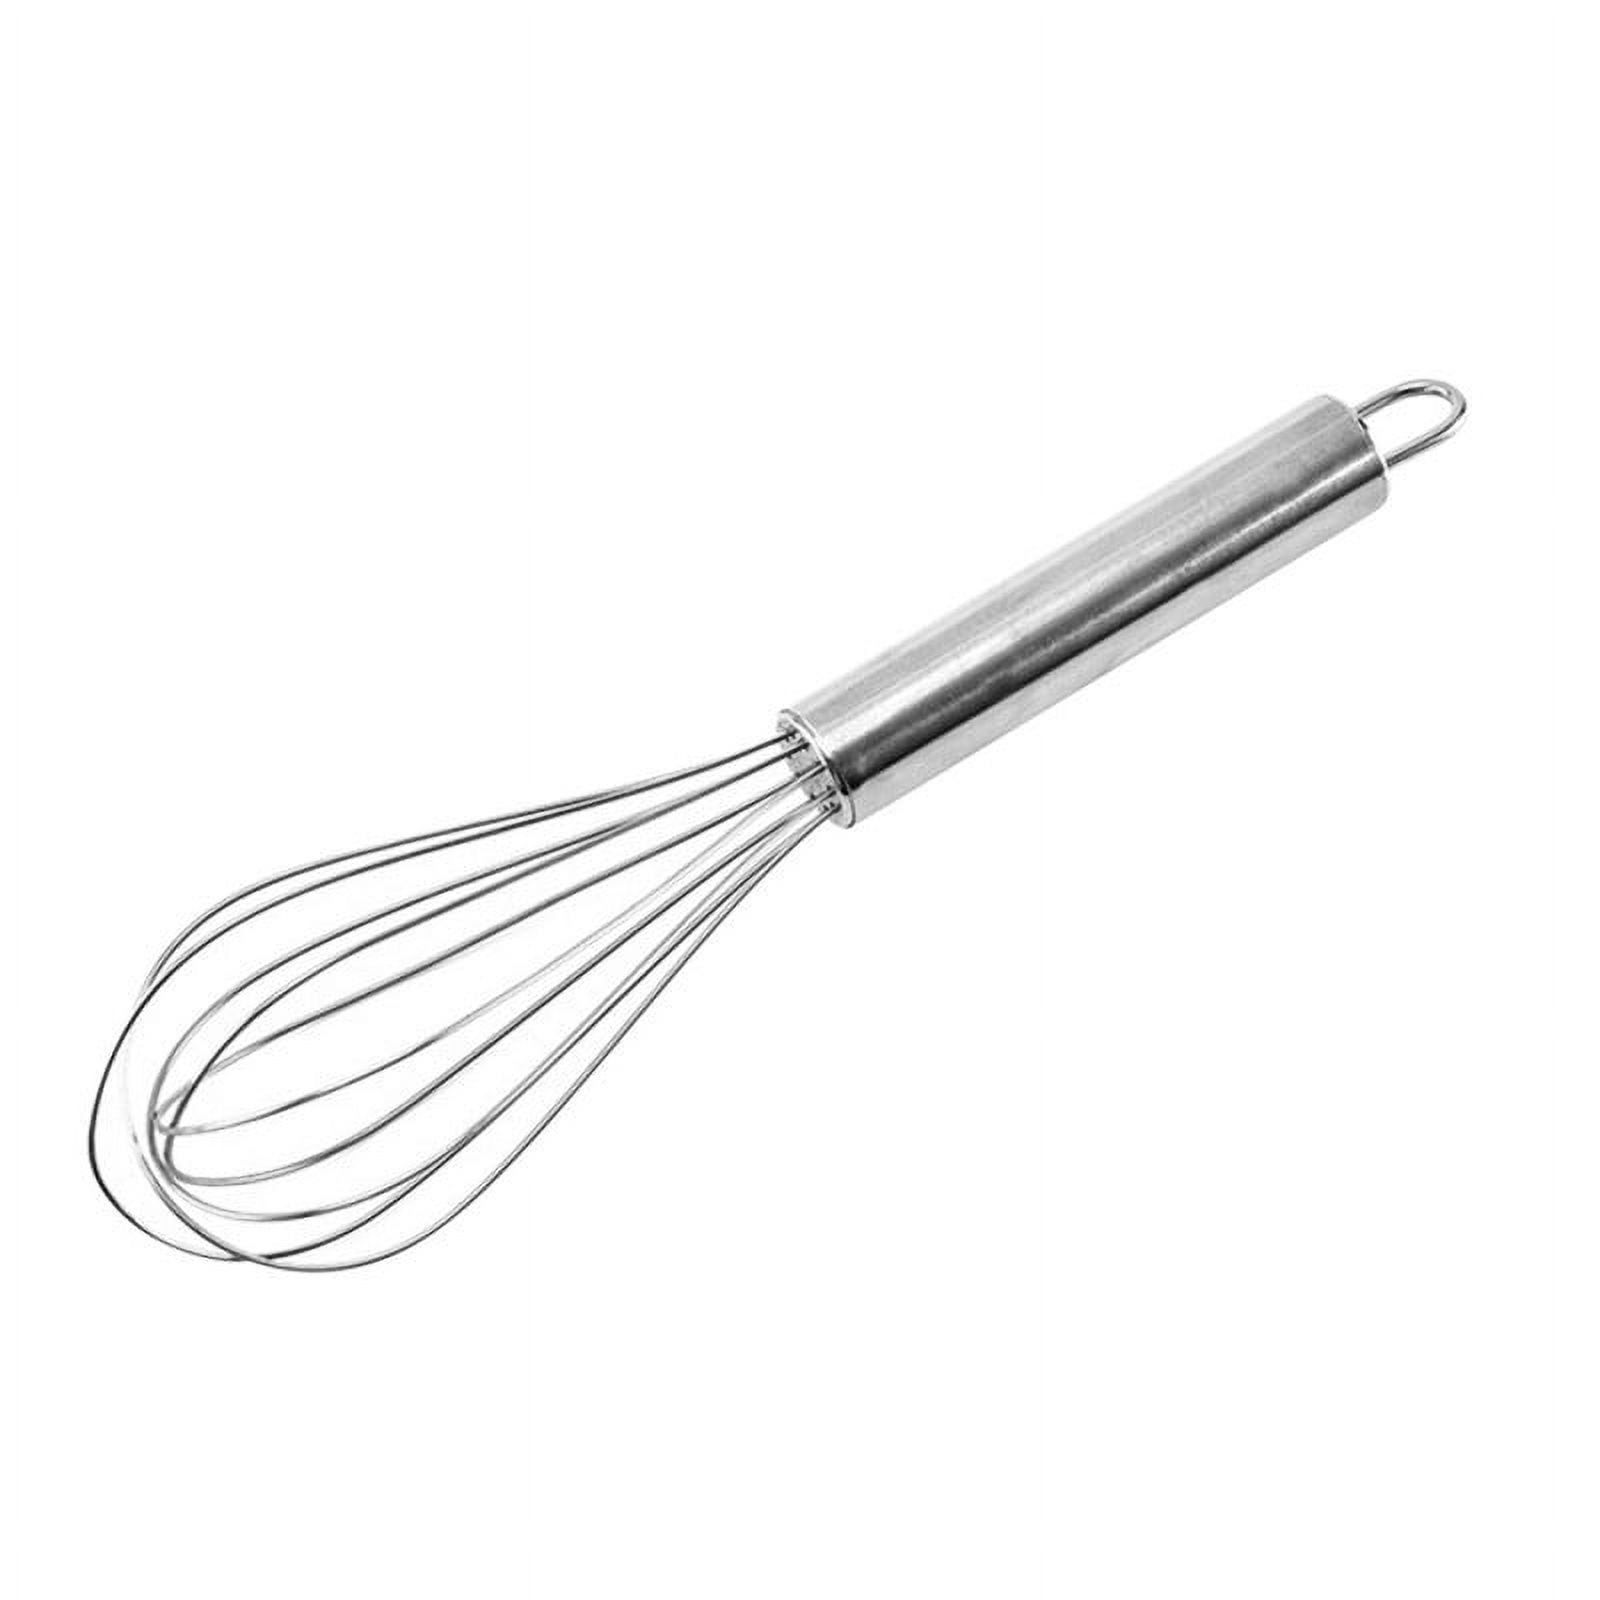 Stainless Steel Egg Wire Tiny Whisks for Cooking Baking, Professional Whisking  Wisk Kitchen Tool Utensil, Beater Balloon Whisker/Wisks/Wisker for Stirring  